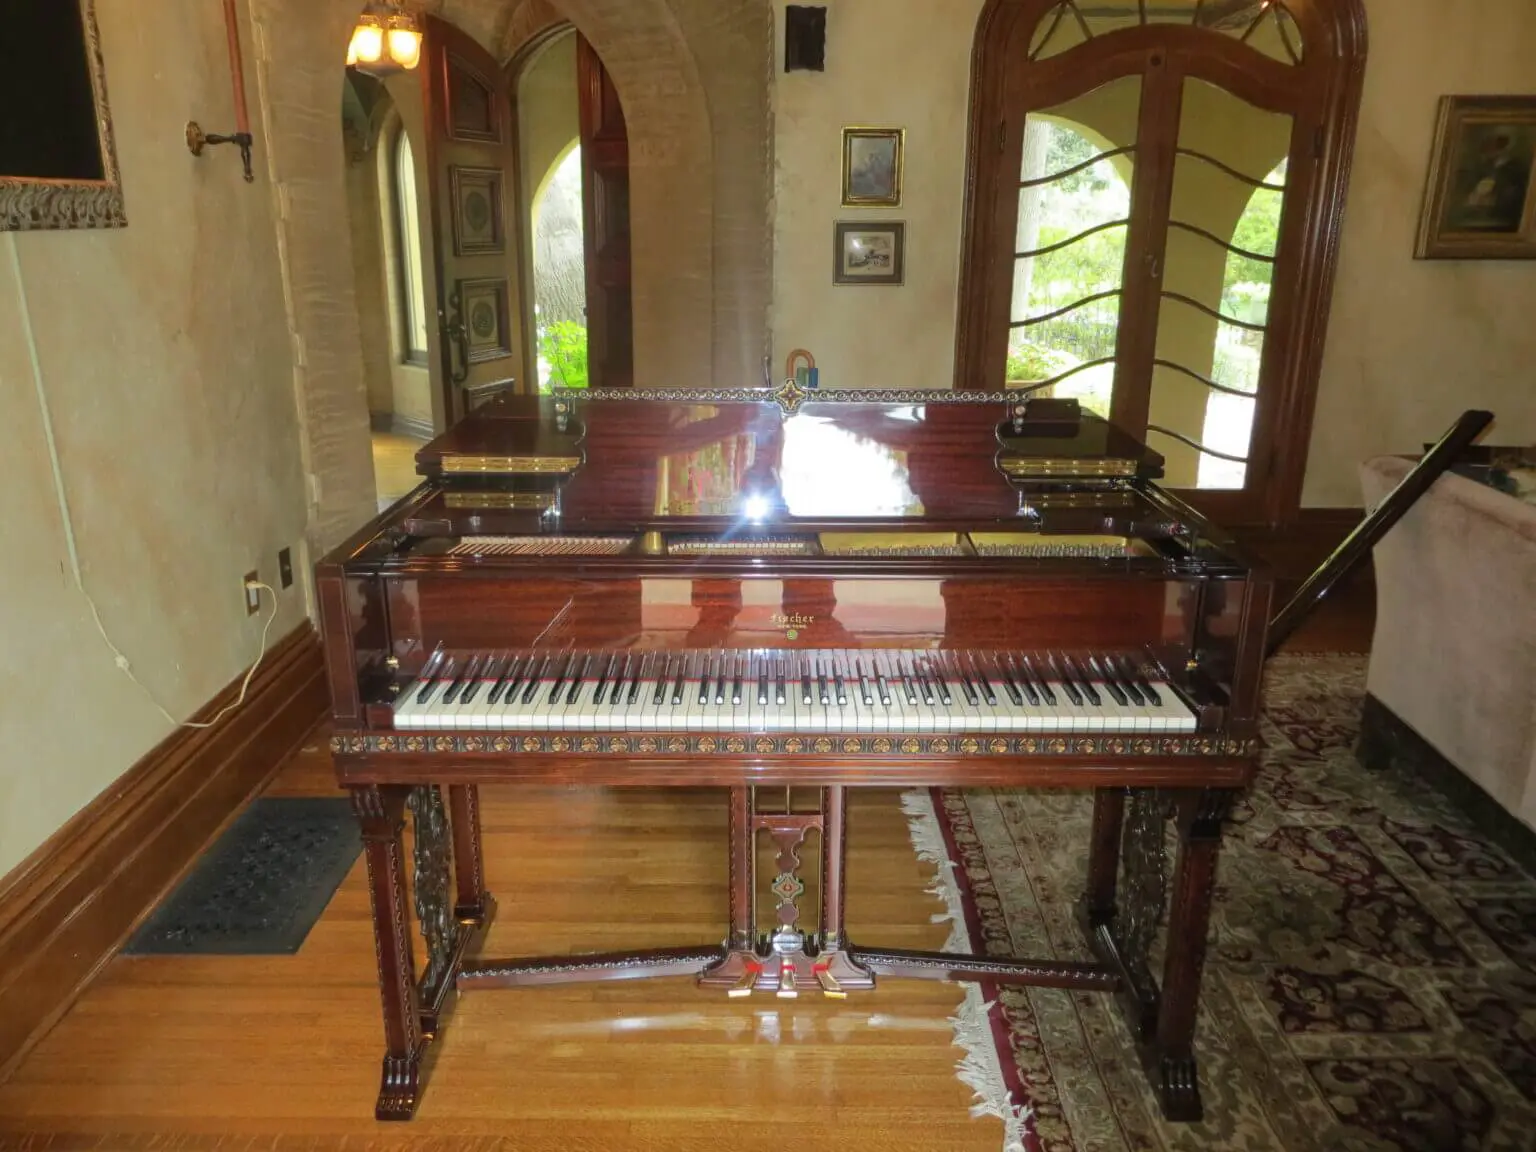 A piano sitting in the middle of a room.